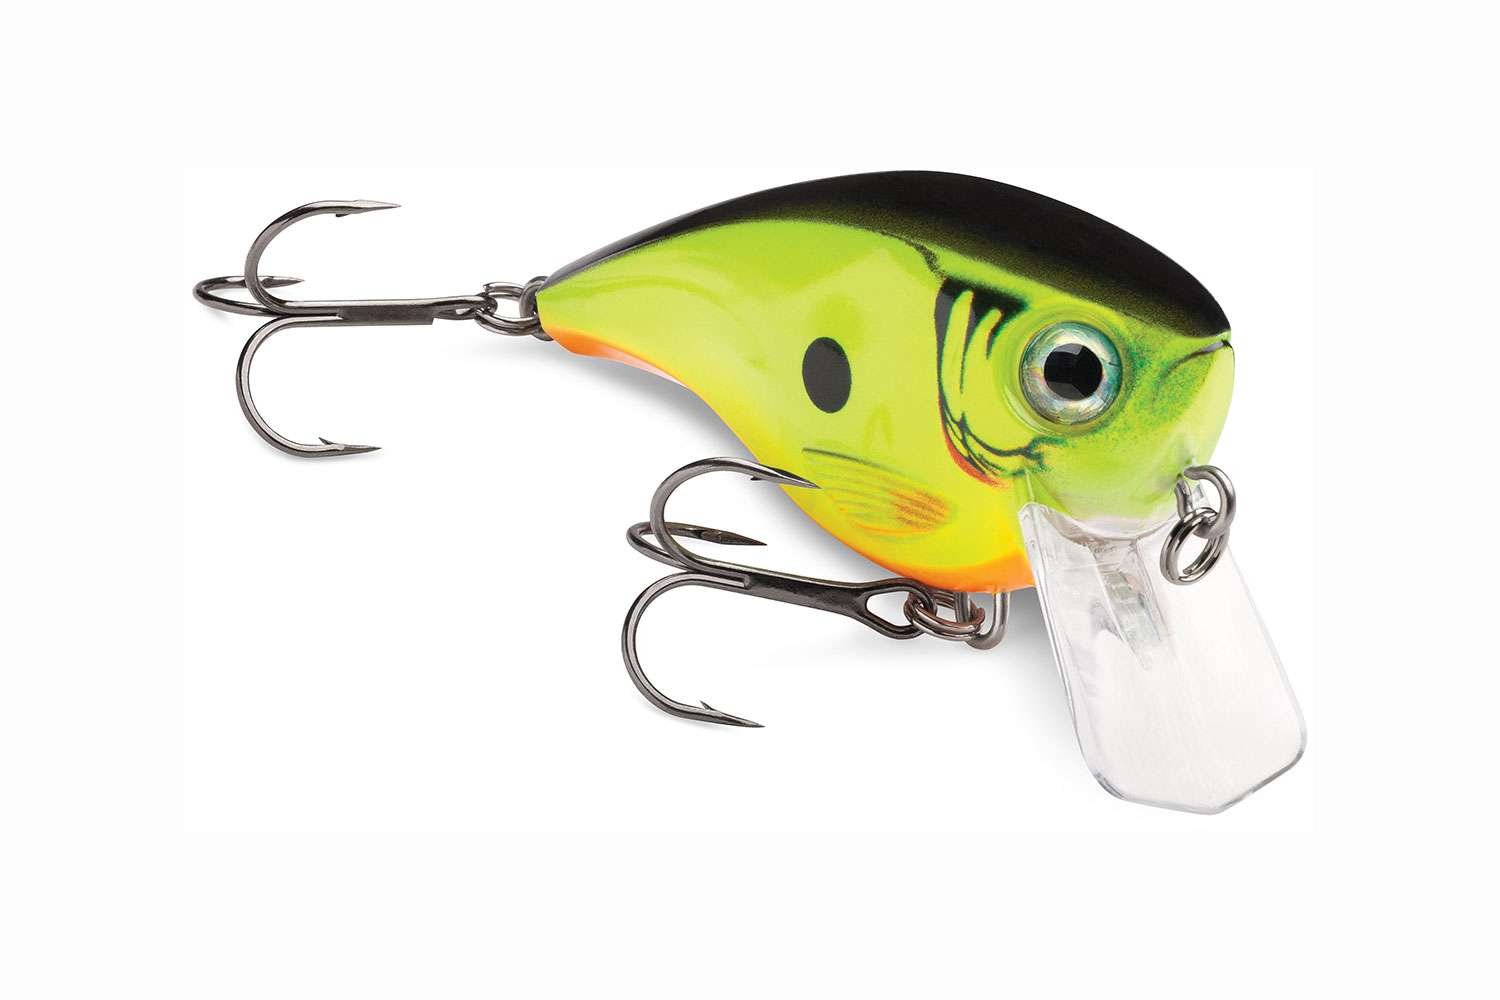 <p><b>Rapala BX Big Brat </b></p>
The BX Big Brat has a balsa inner core with an armor coating of rugged copolymer, it is the most durable, fish catchinâ square bill ever.<br>
<p><b>MSRP: $9.99</b></p>
<a href=